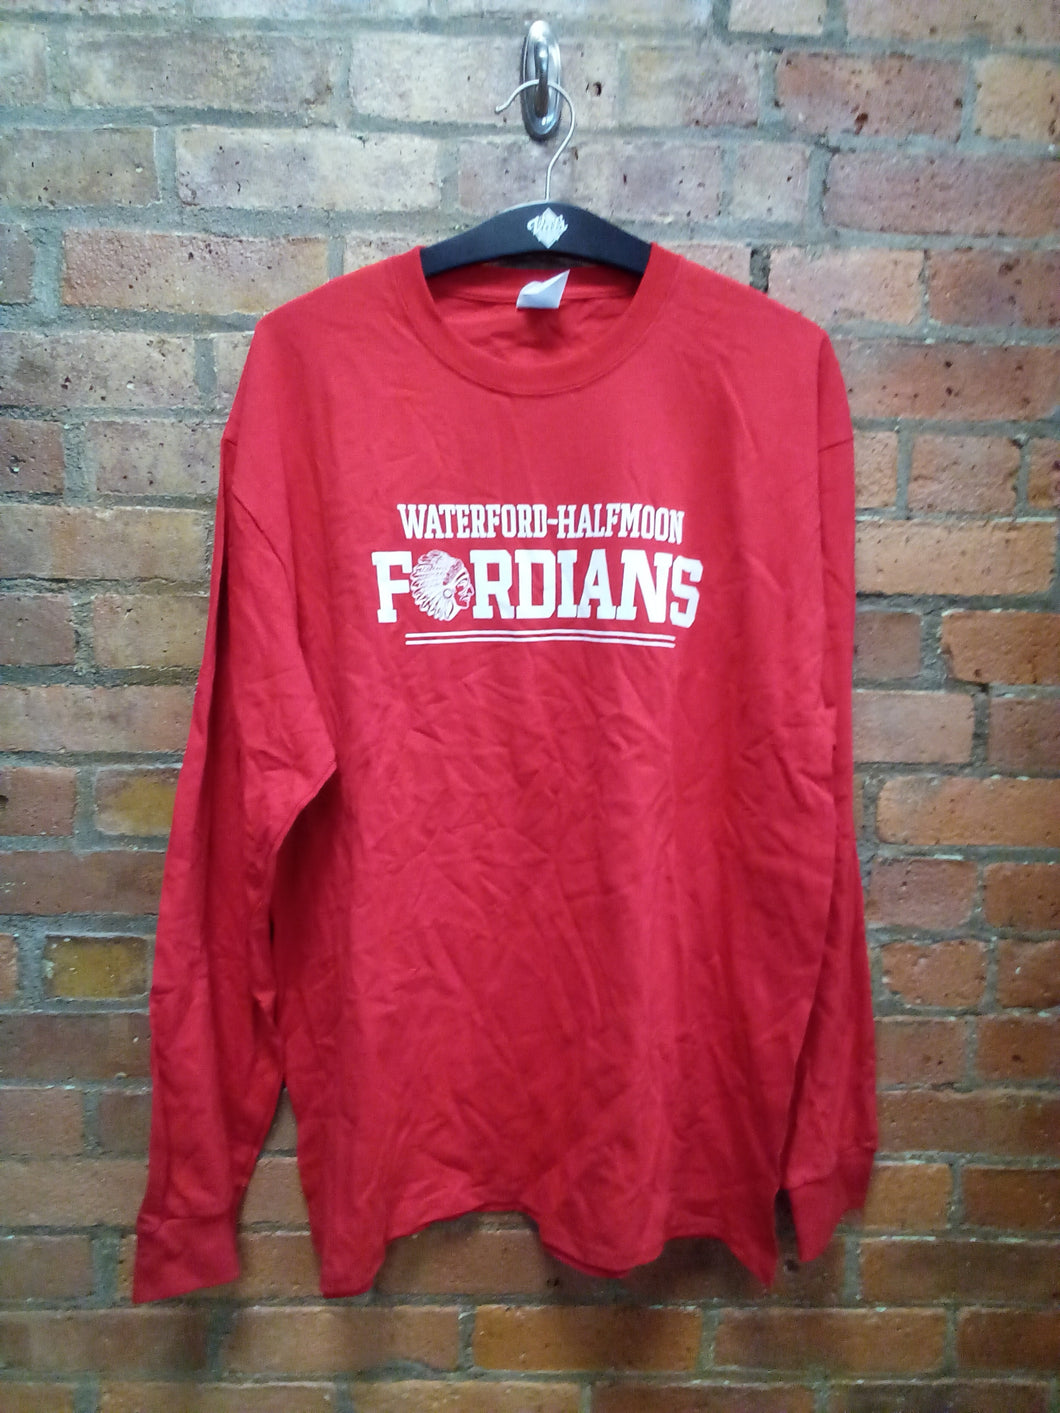 CLEARANCE - Waterford - Halfmoon Fordians Long Sleeved Shirt - Size XL